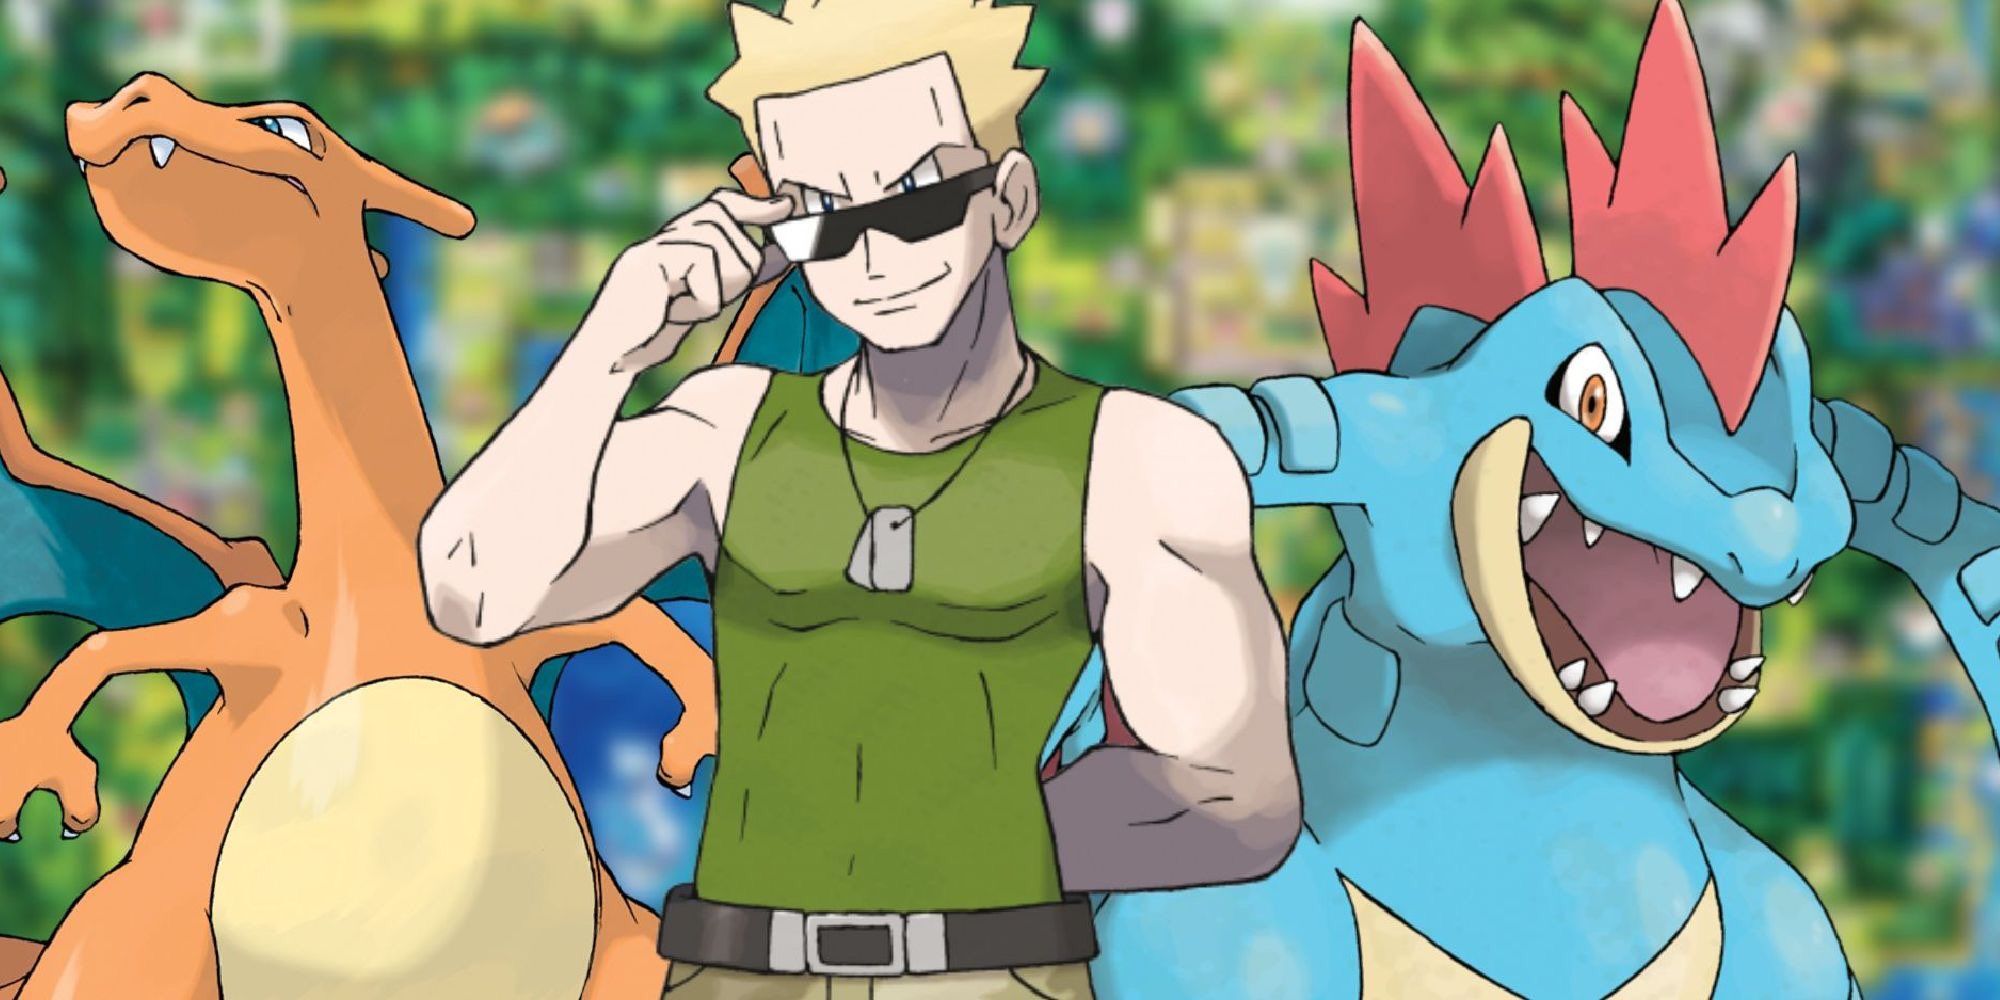 LT. Surge with Charizard and Feraligatr